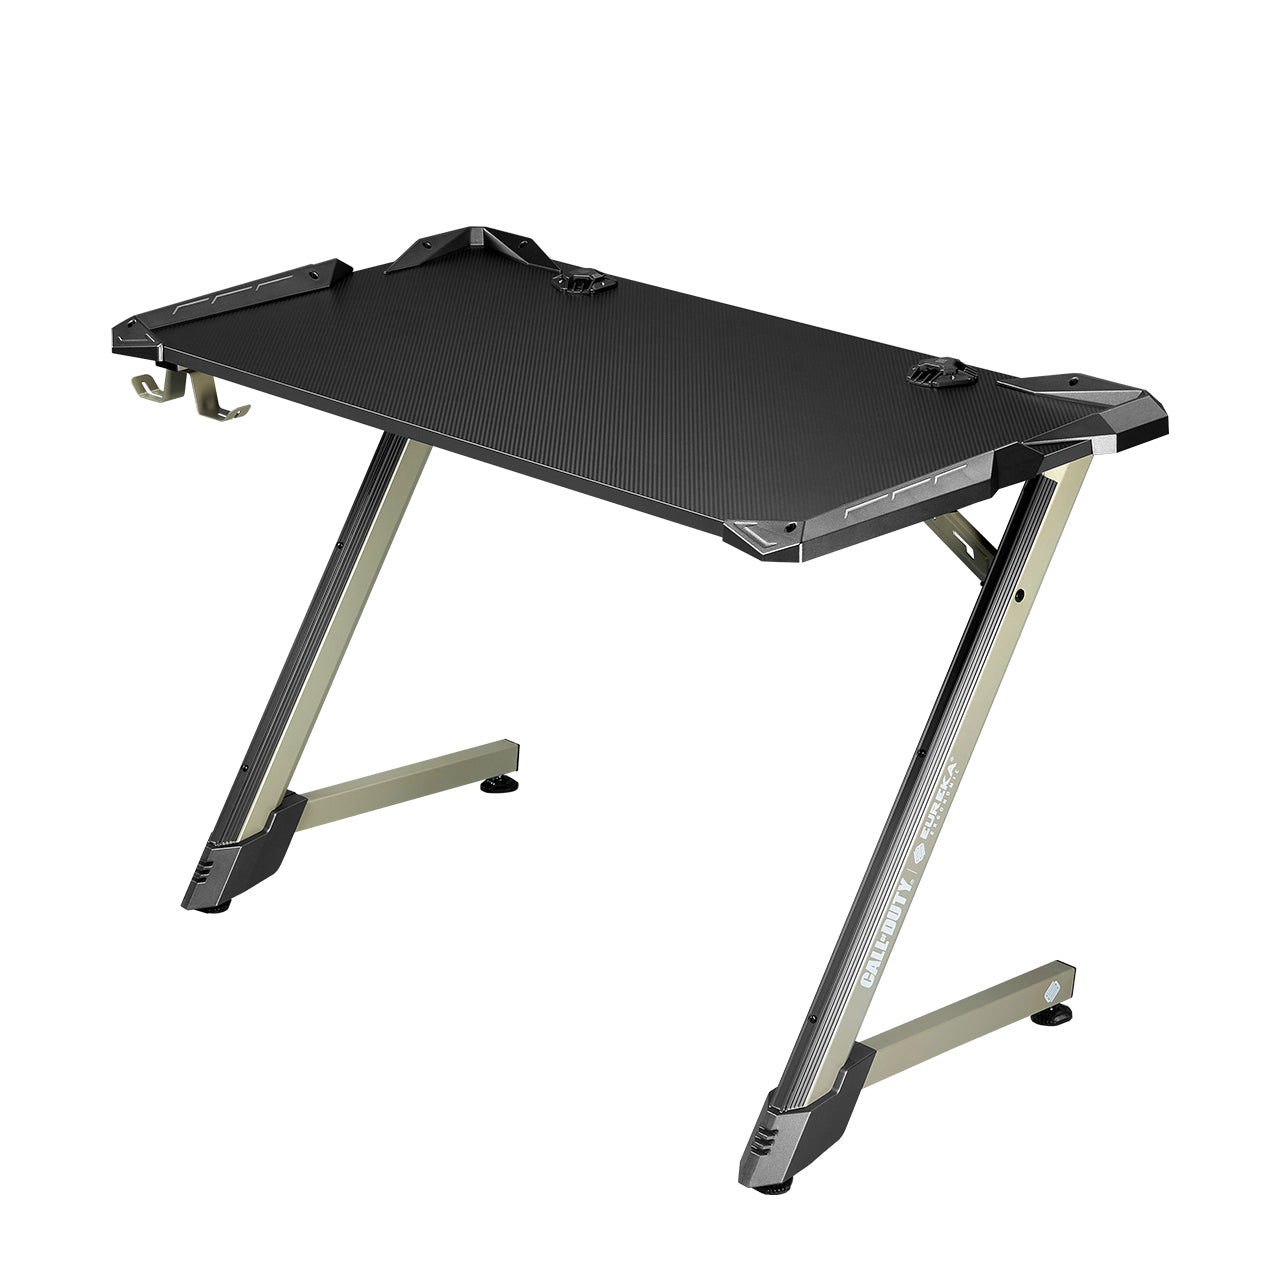 Eureka Gaming Table- Call Of Duty Series, 43 Inches, RGB Lights with Accessory Hook